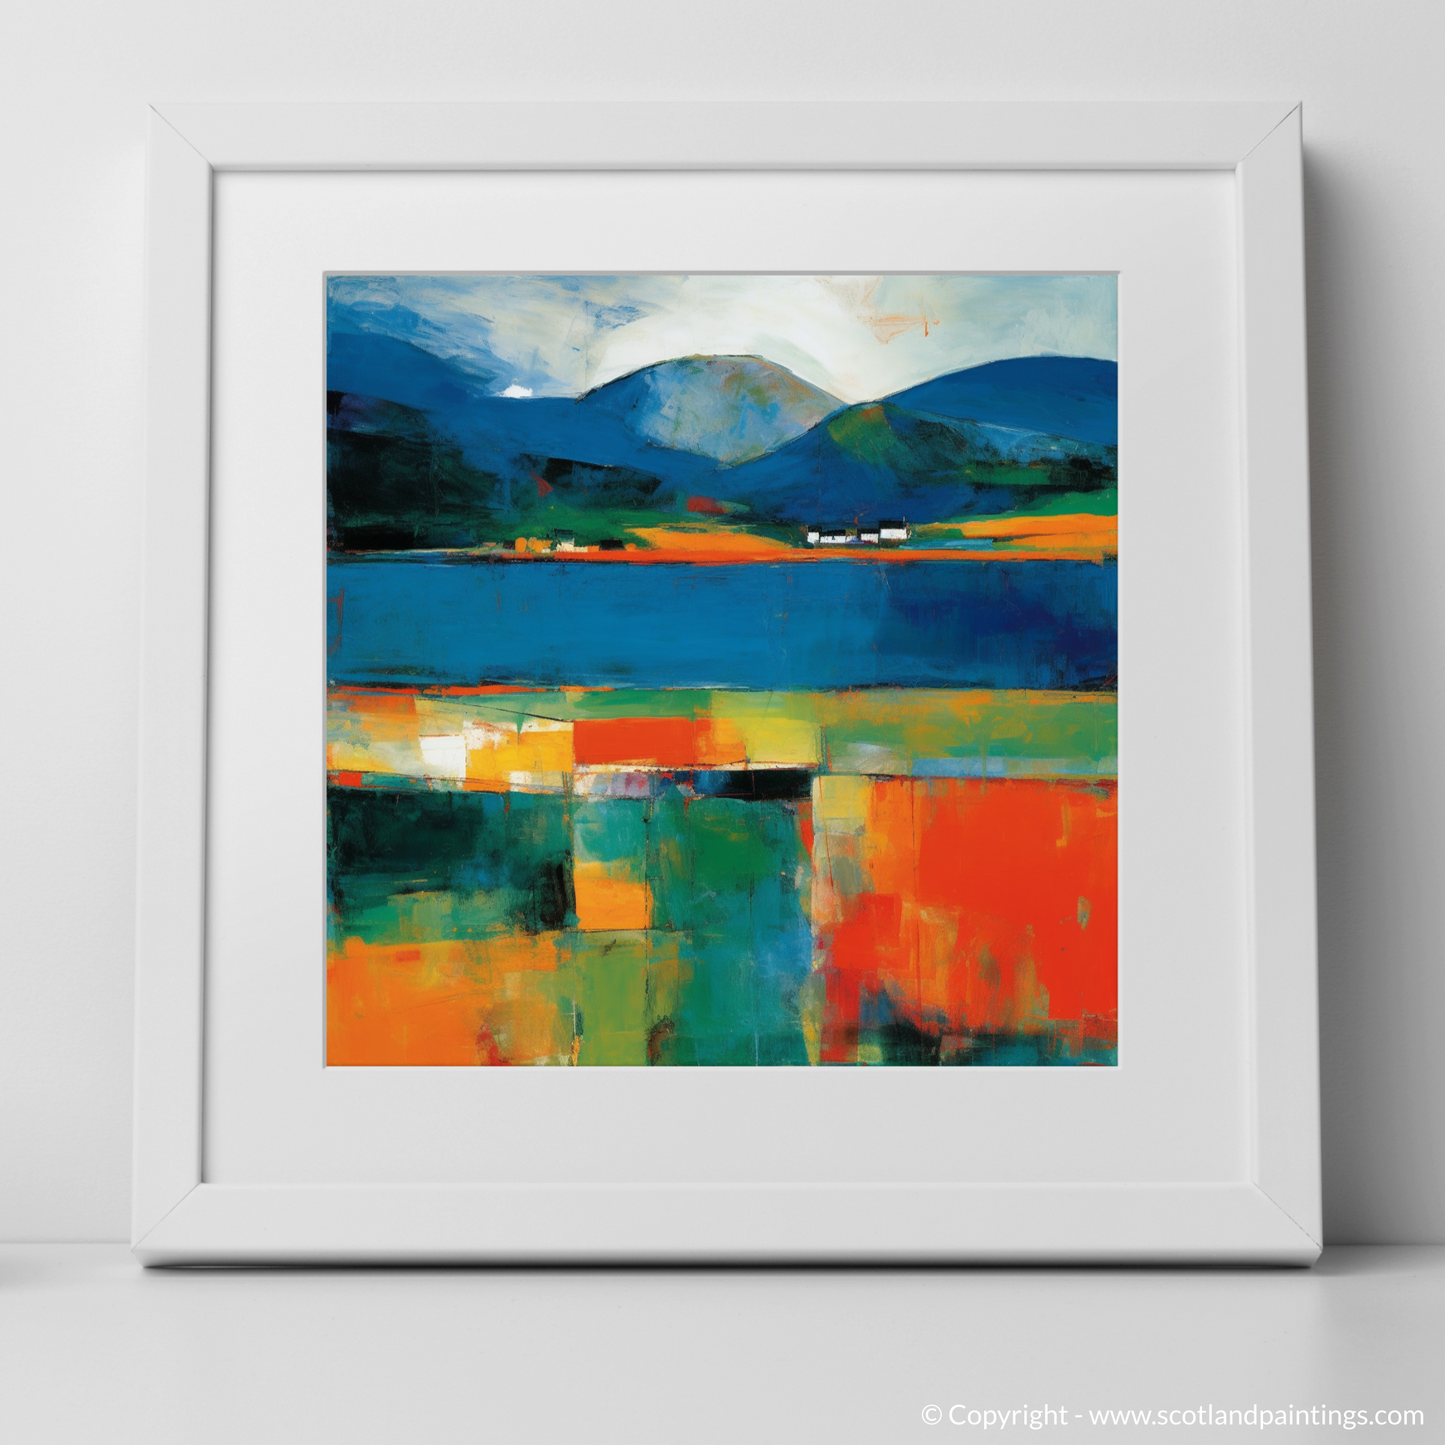 Highland Echoes: An Abstract Impressionist Ode to Loch Linnhe